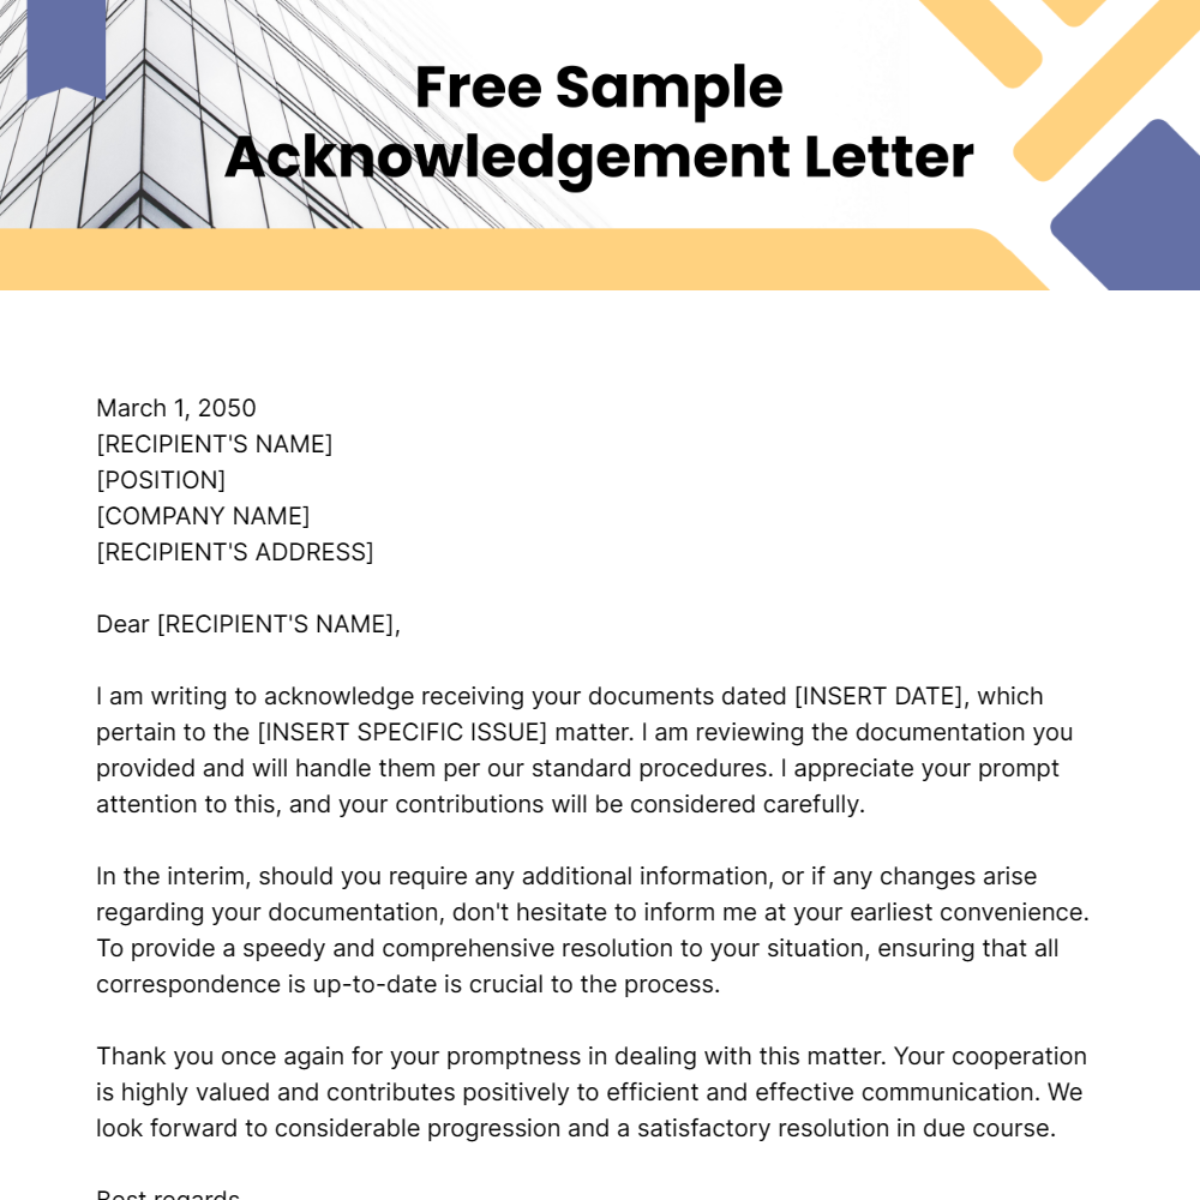 Sample Acknowledgement Letter Template